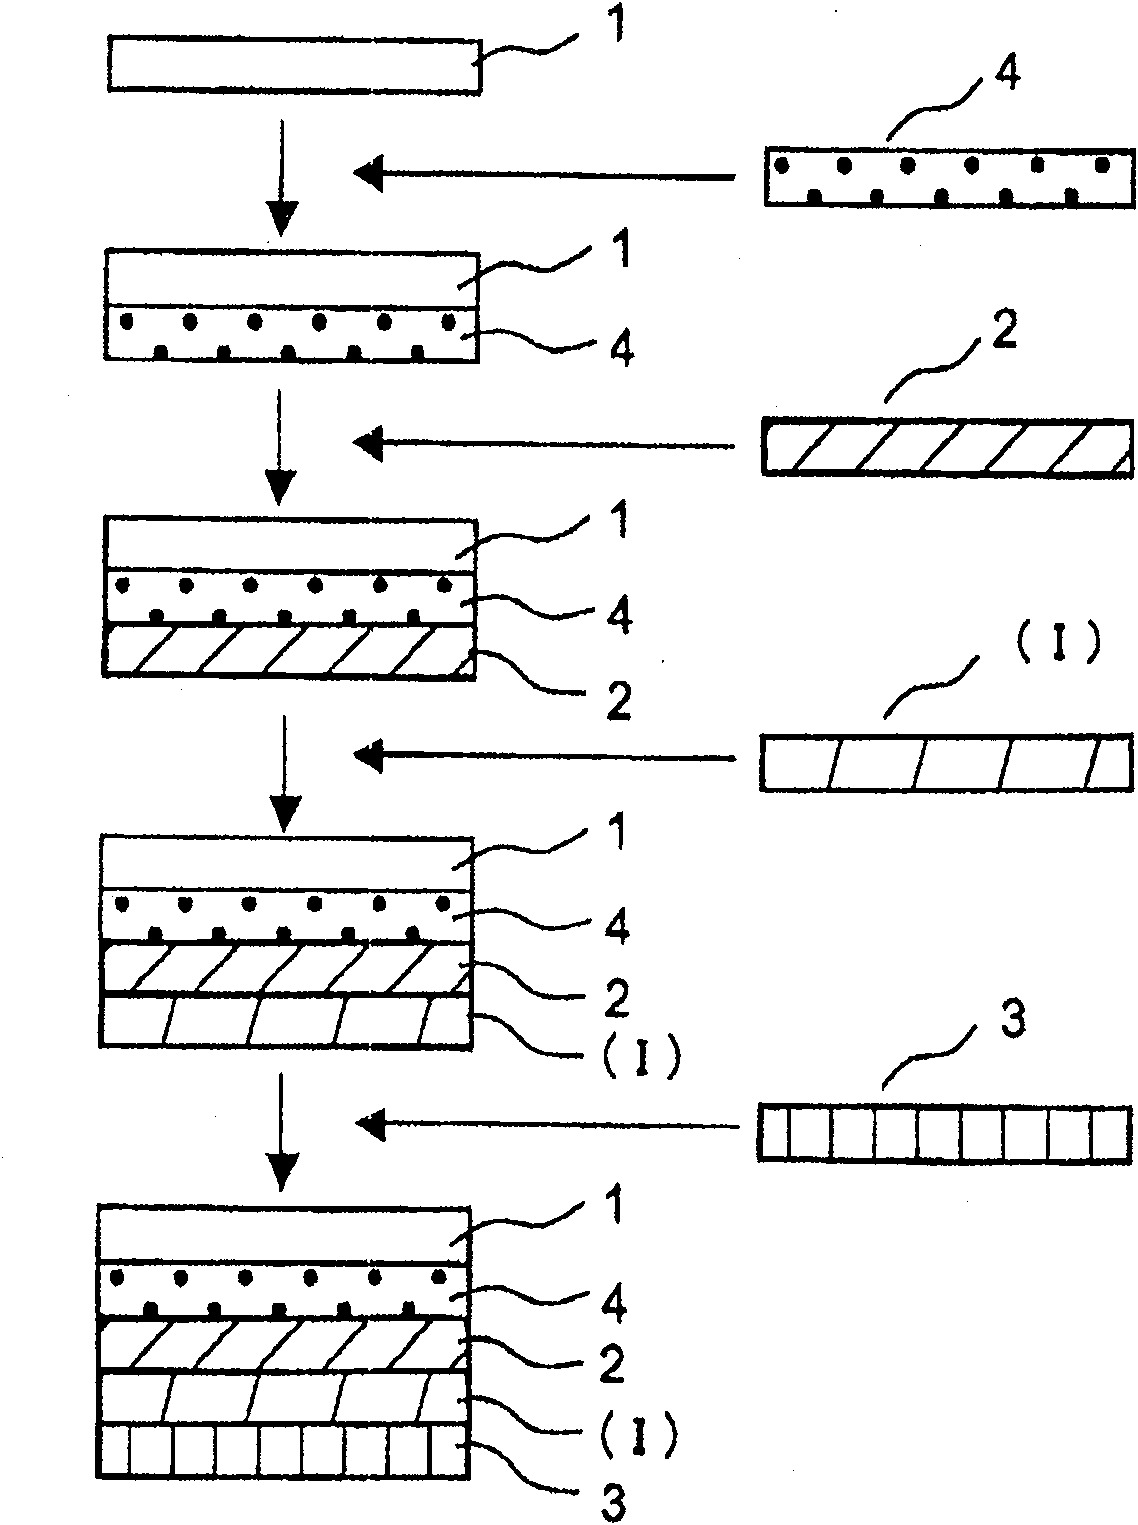 Electromagnetic-wave-shielding adhesive film, process for producing the same, and method of shielding adherend from electromagnetic wave